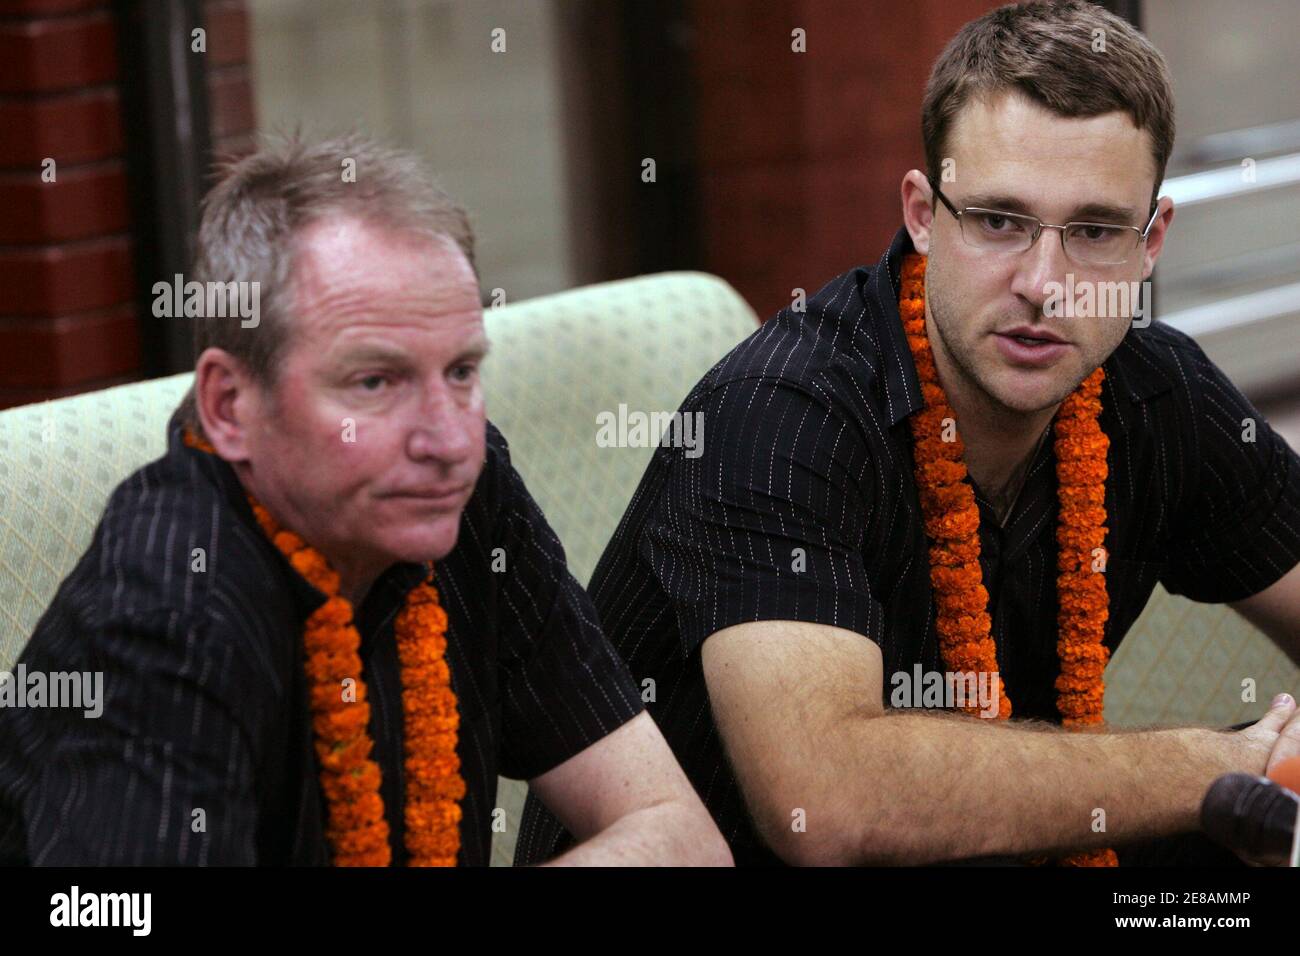 New Zealand cricket team captain Daniel Vettori (R) talks to press next to his team manager Lindsay Crocker at Zia International Airport in Dhaka, September 30, 2008. The New Zealand cricket team will play three one-day internationals and two test matches against Bangladesh on October 9 at the Sher-e-Bangla National Stadium in Mirpur . REUTERS/Andrew Biraj (BANGLADESH) Stock Photo